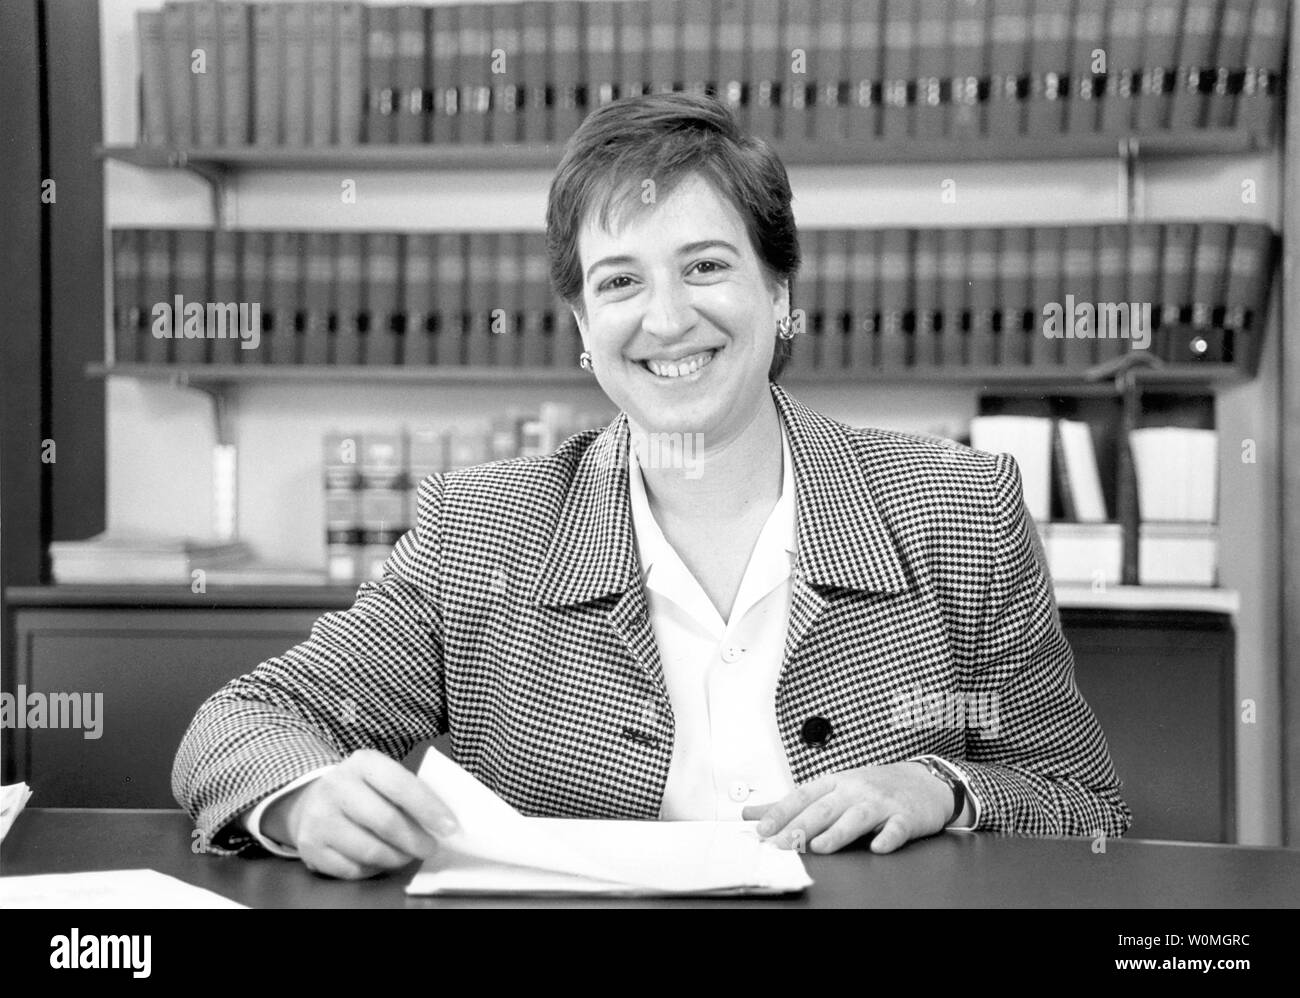 Solicitor General Elena Kagan is seen at the University of Chicago Law School where she was an assistant professor in 1993. On May 10, 2010, U.S. President Barack Obama nominated Kagan to the U.S. Supreme Court to replace retiring Justice John Paul Stevens. UPI/University of Chicago Law School Stock Photo